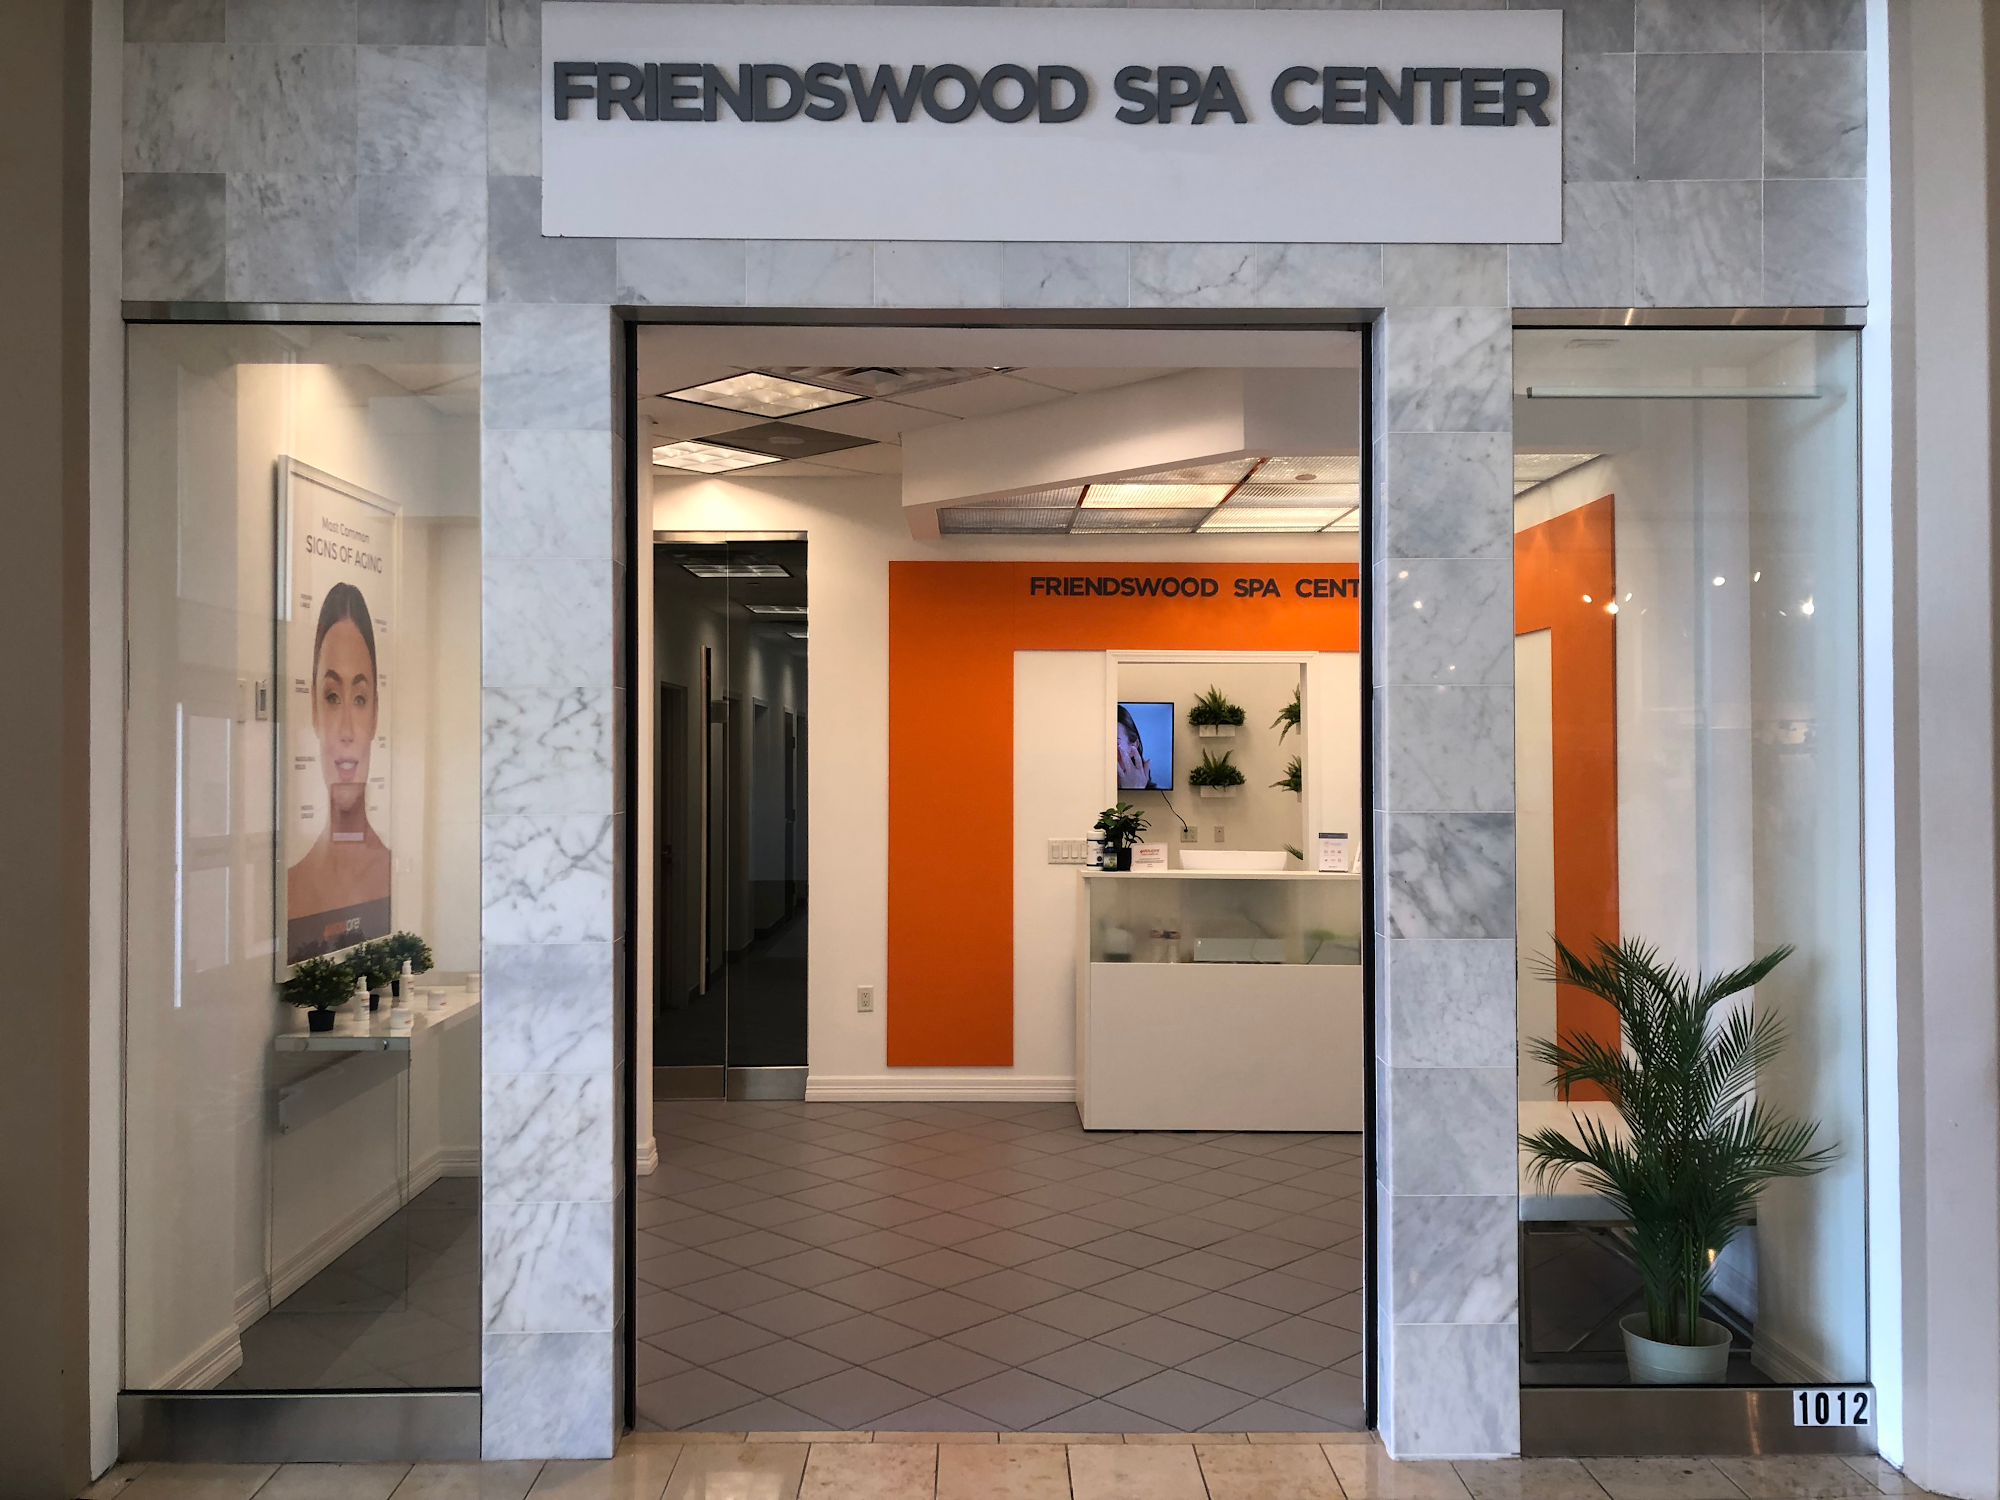 Friendswood Spa Center by Voupre